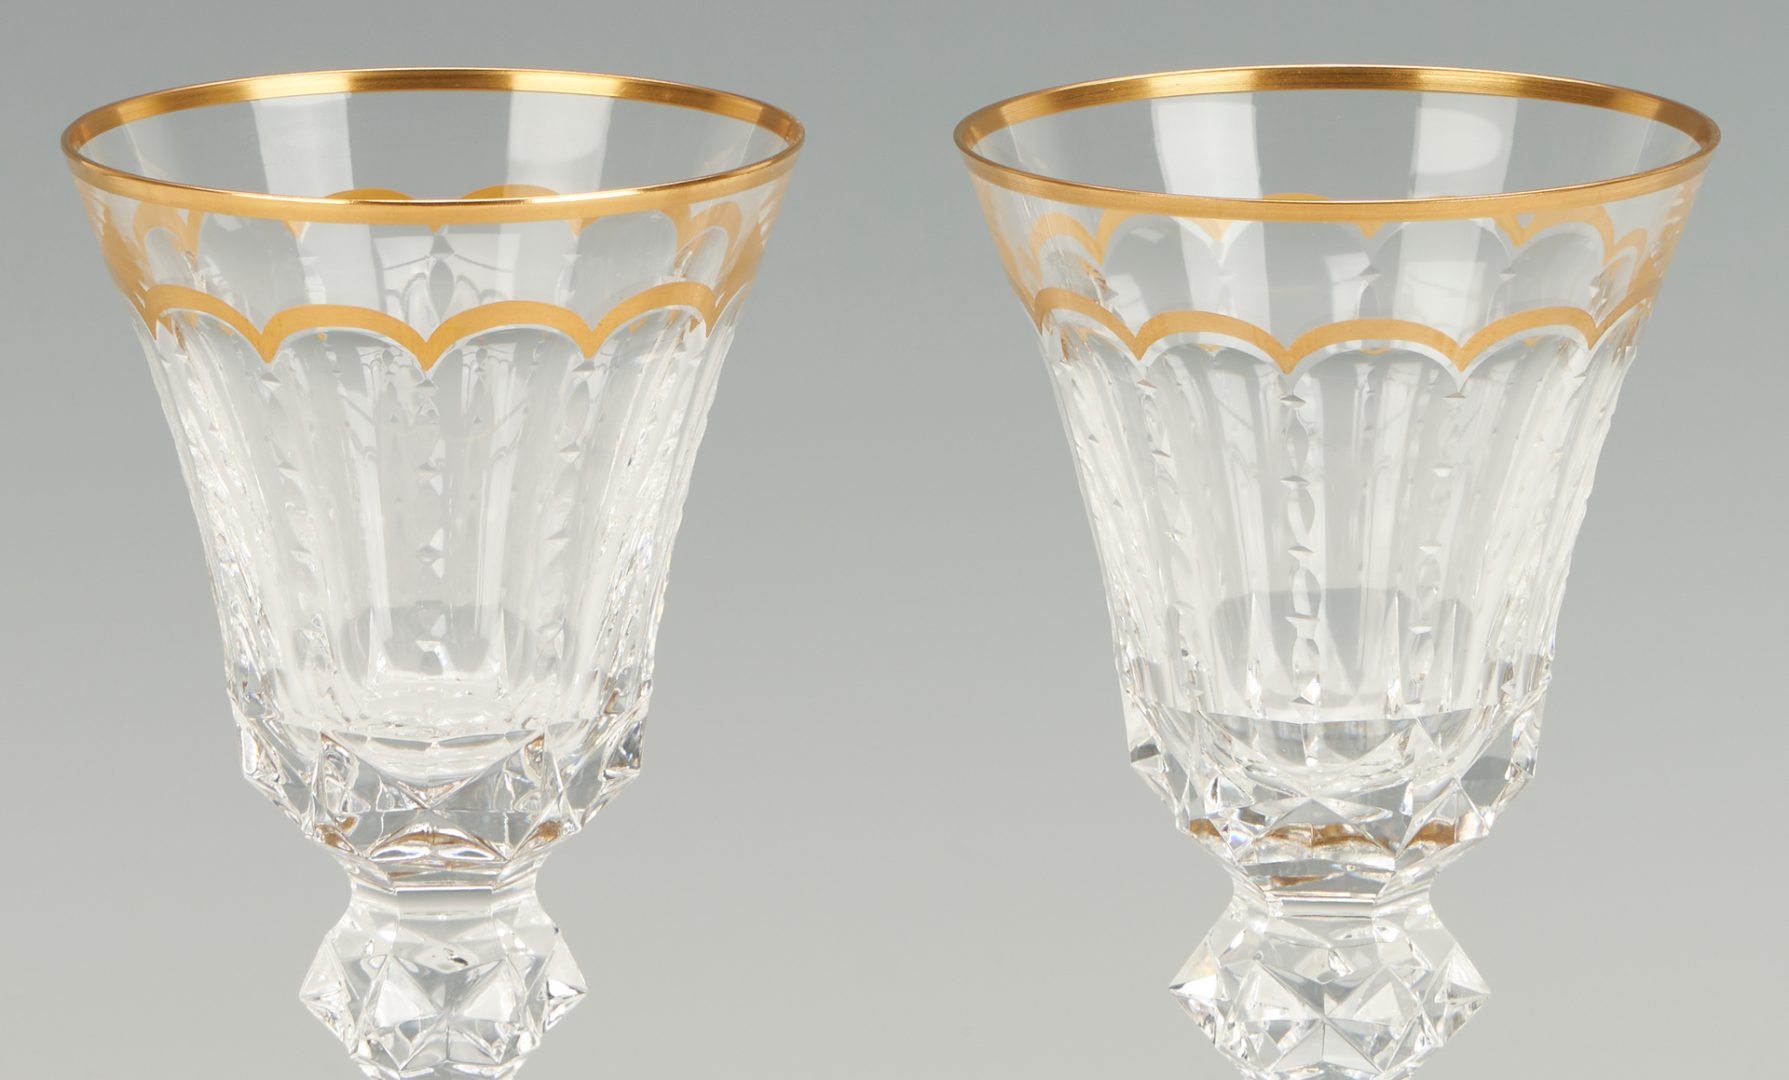 Lot 371: 14 St. Louis Excellence Crystal Burgundy Wine Glasses